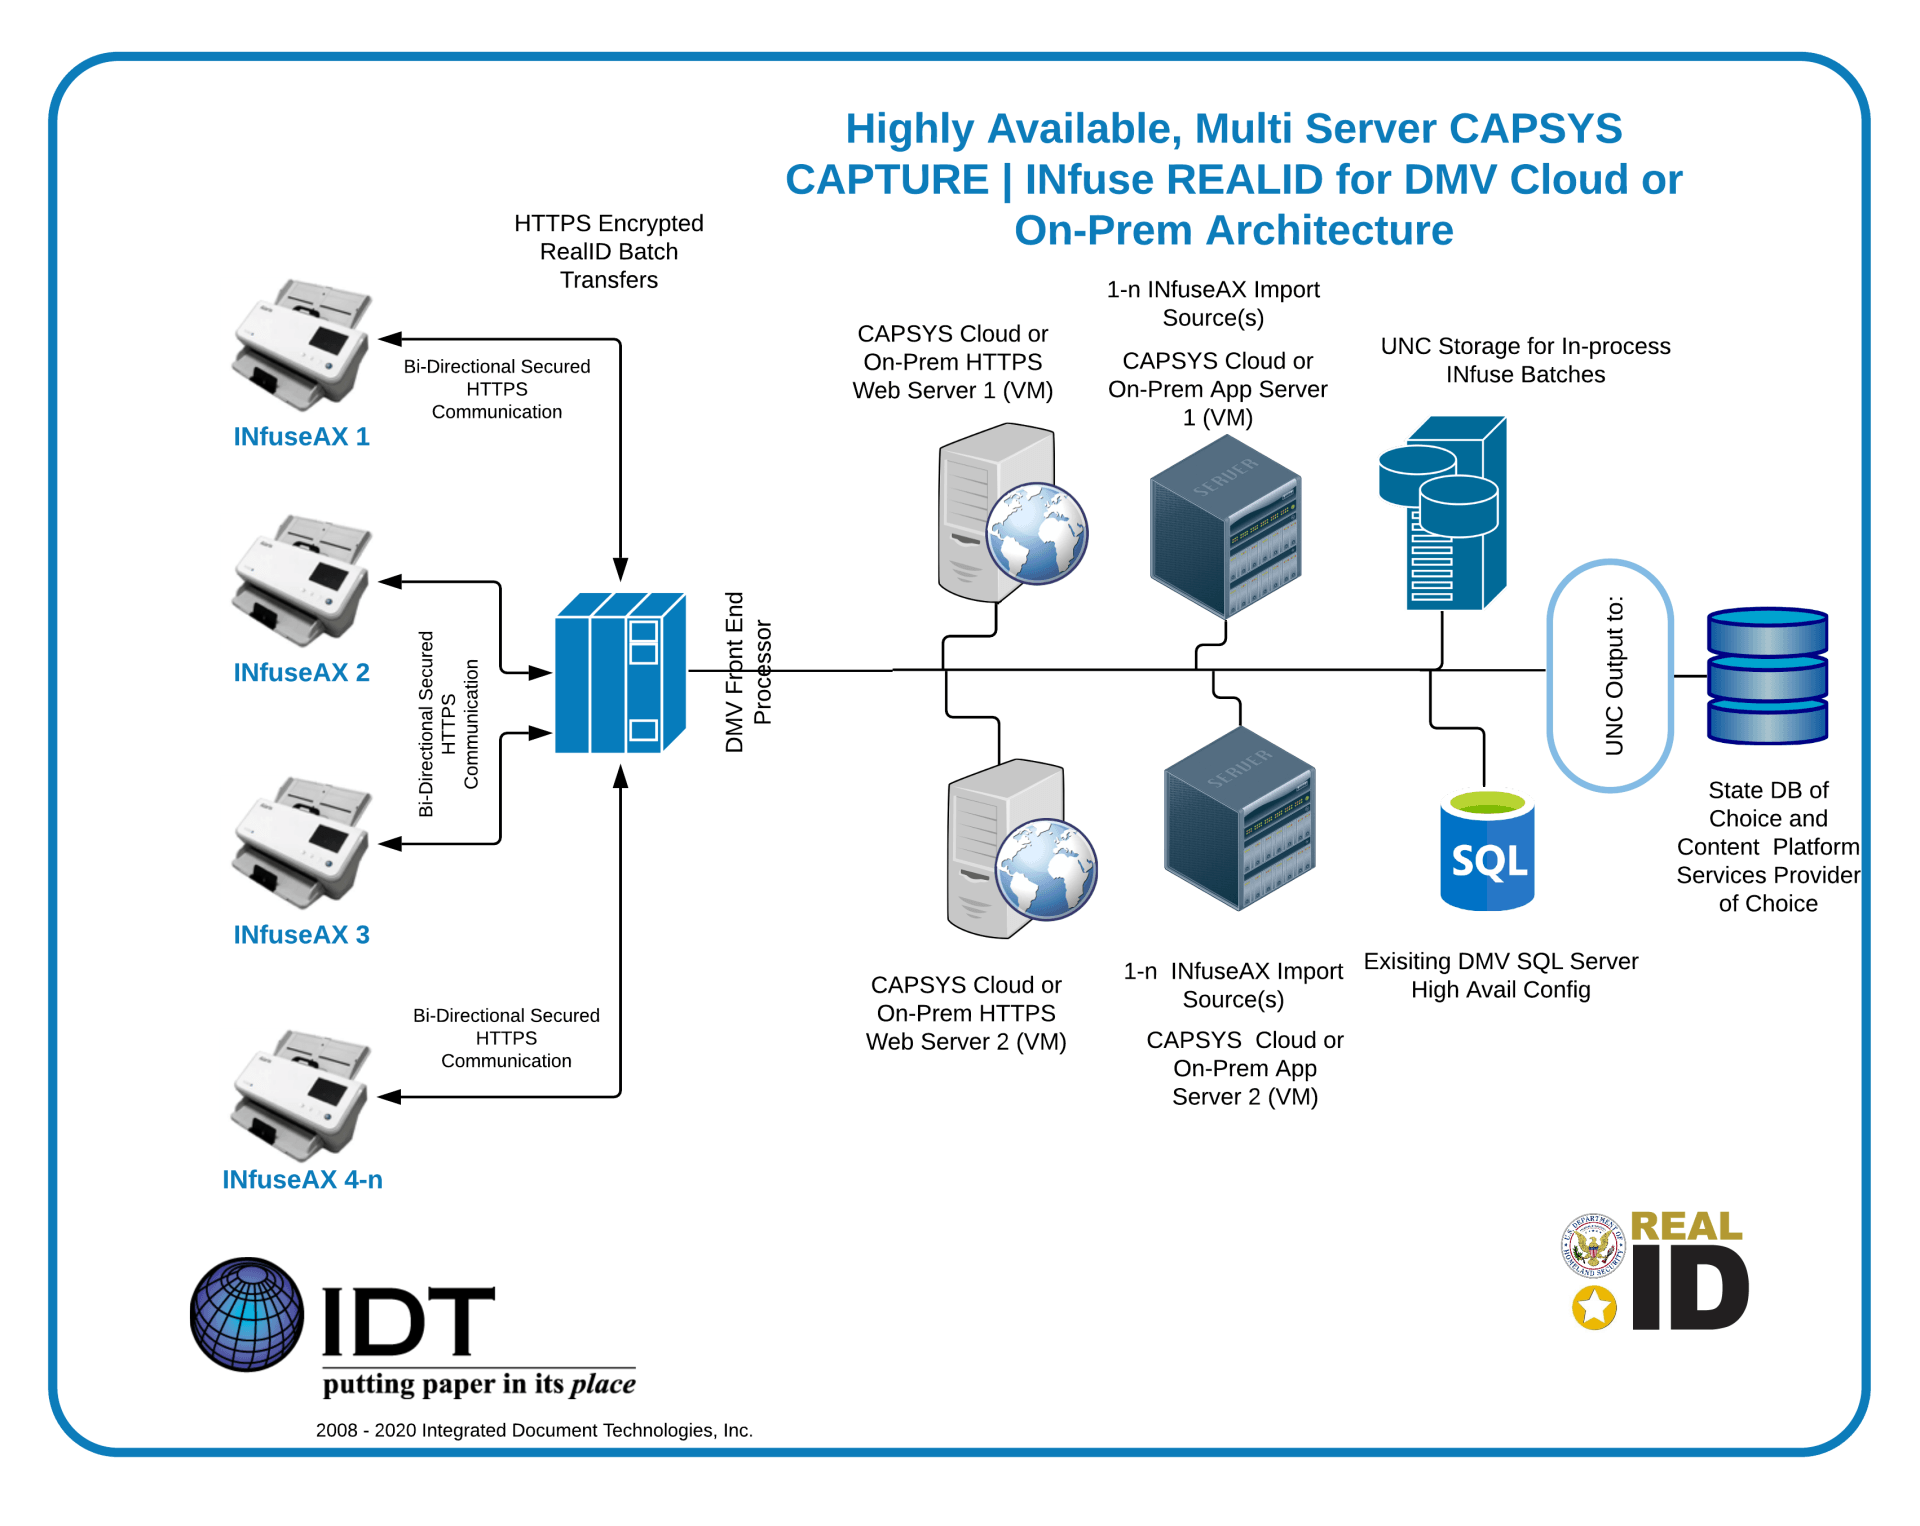 REAL ID Solution Diagram featuring IoT Smart Connected Scanning solutions from IDT, Kodak Alaris and CAPSYS CAPTURE ONLINE